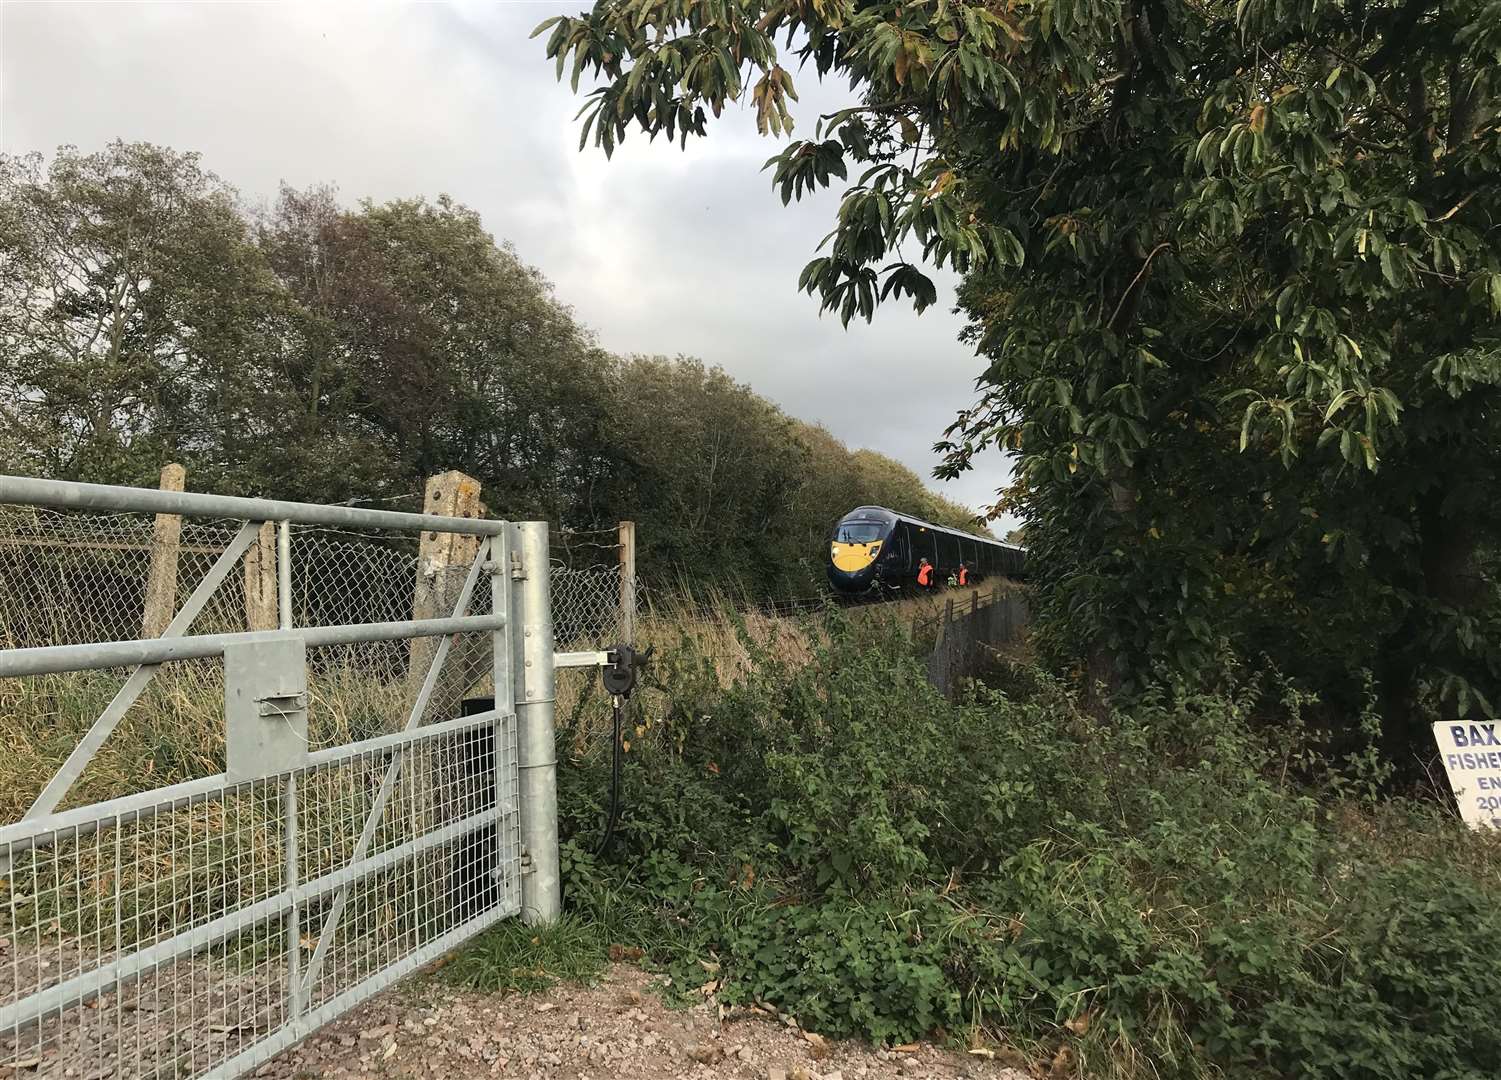 The van and train crash at the Frognal Farm level crossing in Teynham in 2017